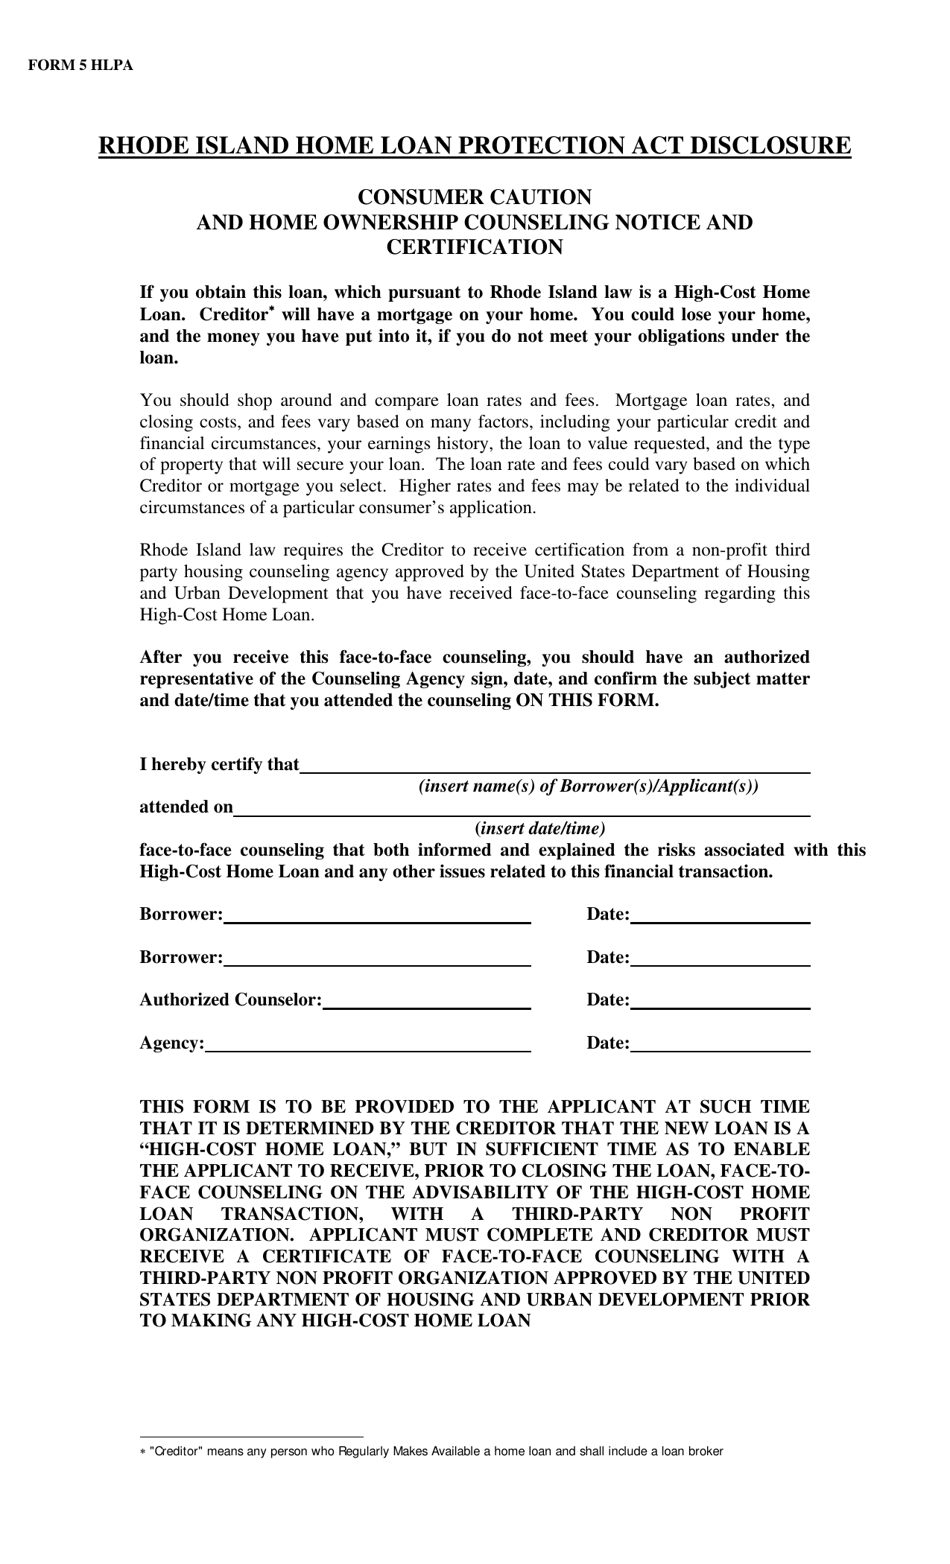 Form 5 Consumer Caution and Home Ownership Counseling Notice and Certification - Rhode Island, Page 1